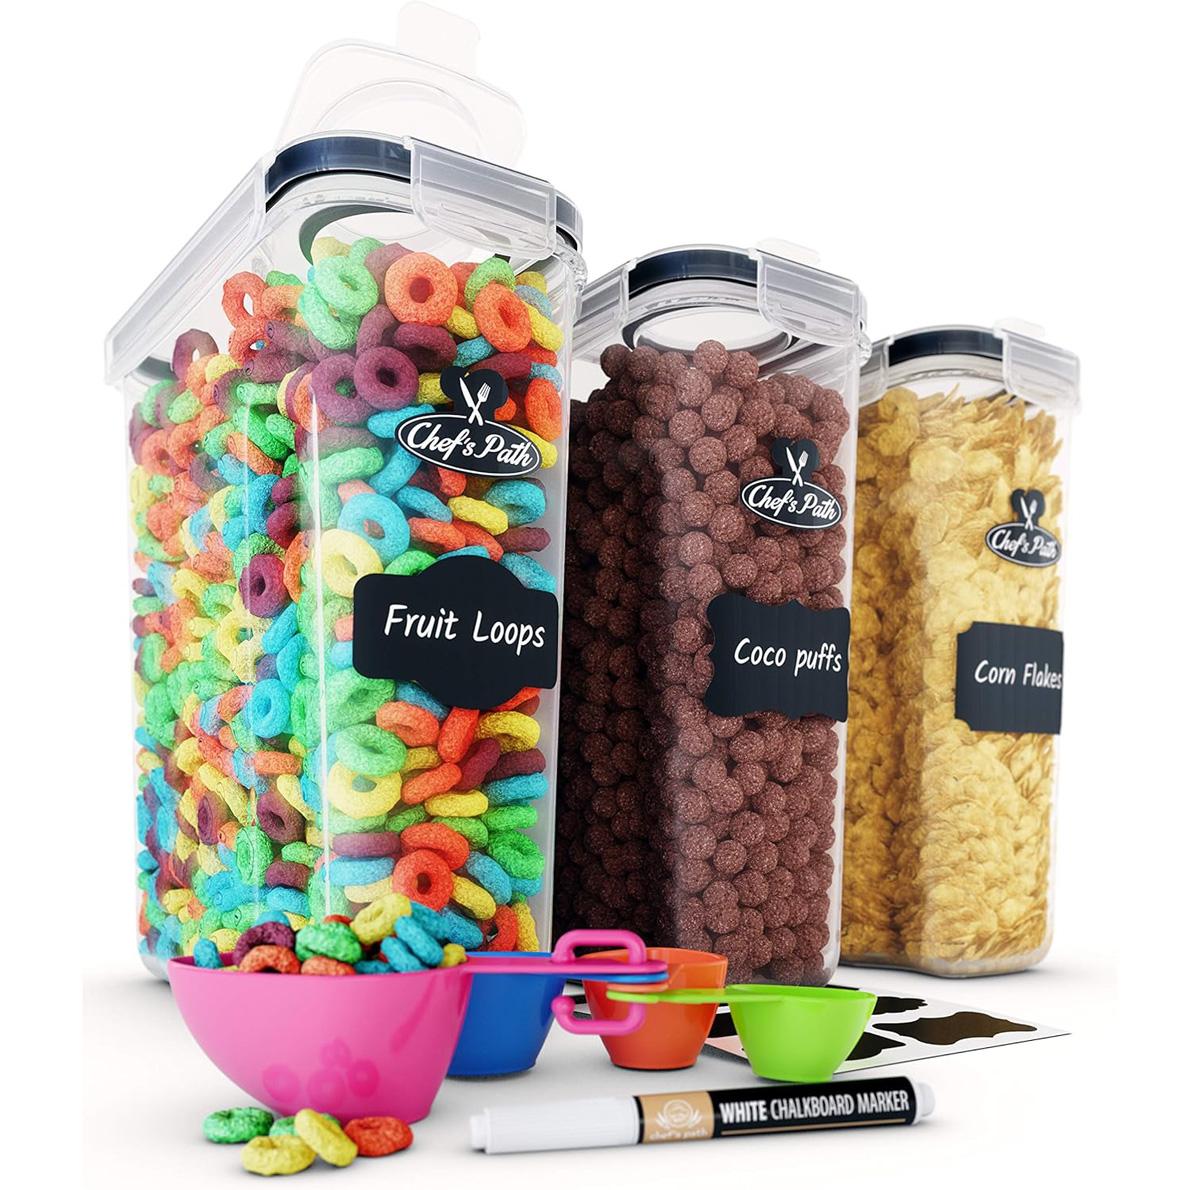 Chefs Path Cereal Containers Storage Set 3 Pack for $13.98